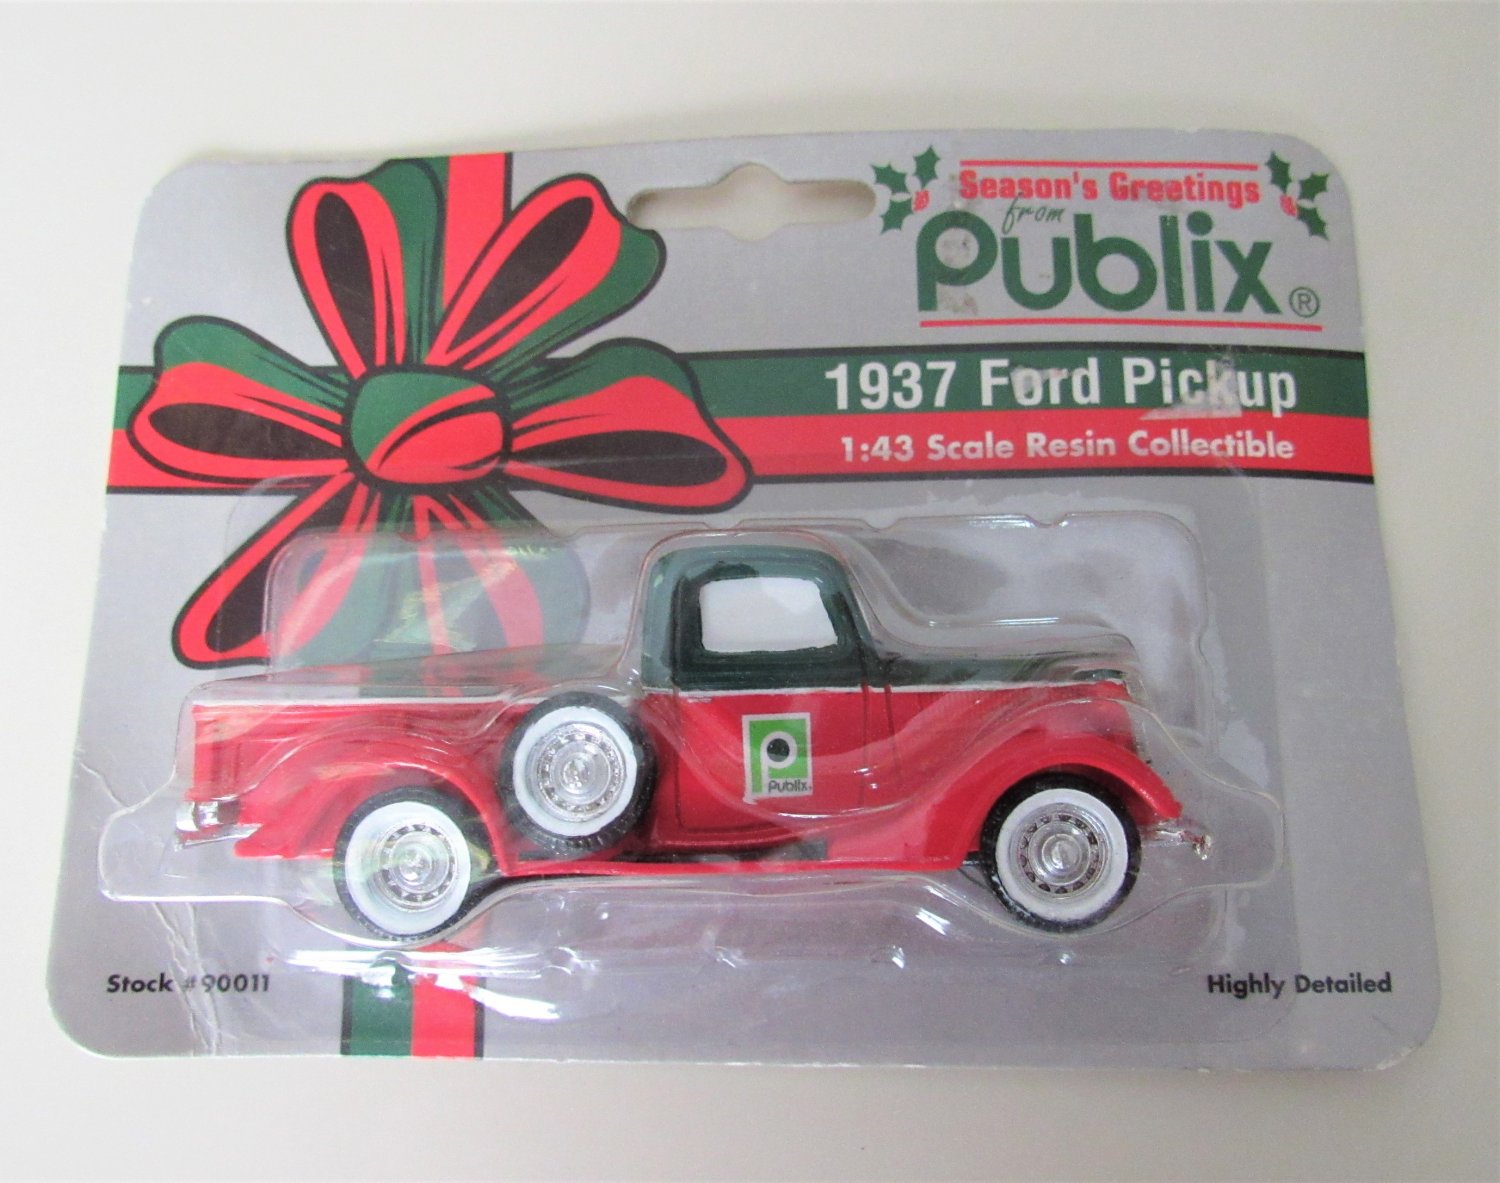 PUBLIX 1937 Ford Pickup SCALE RESIN COLLECTIBLE TRUCK SPECCAST Die Cast